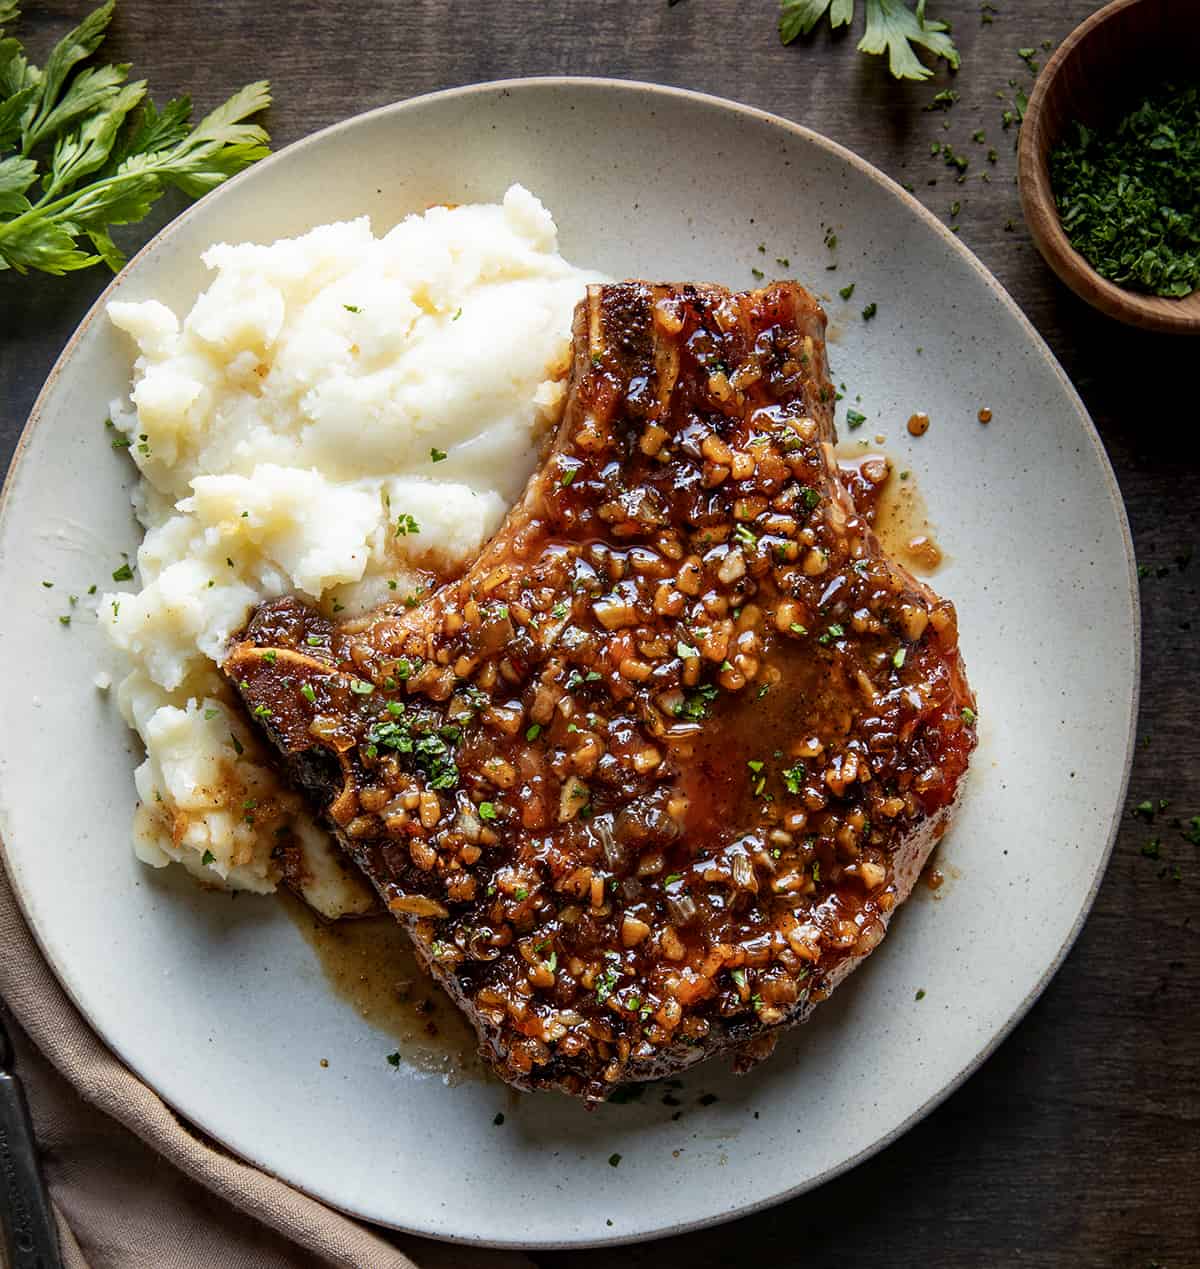 One Honey Garlic Pork Chop on a plate with mashed potatoes.